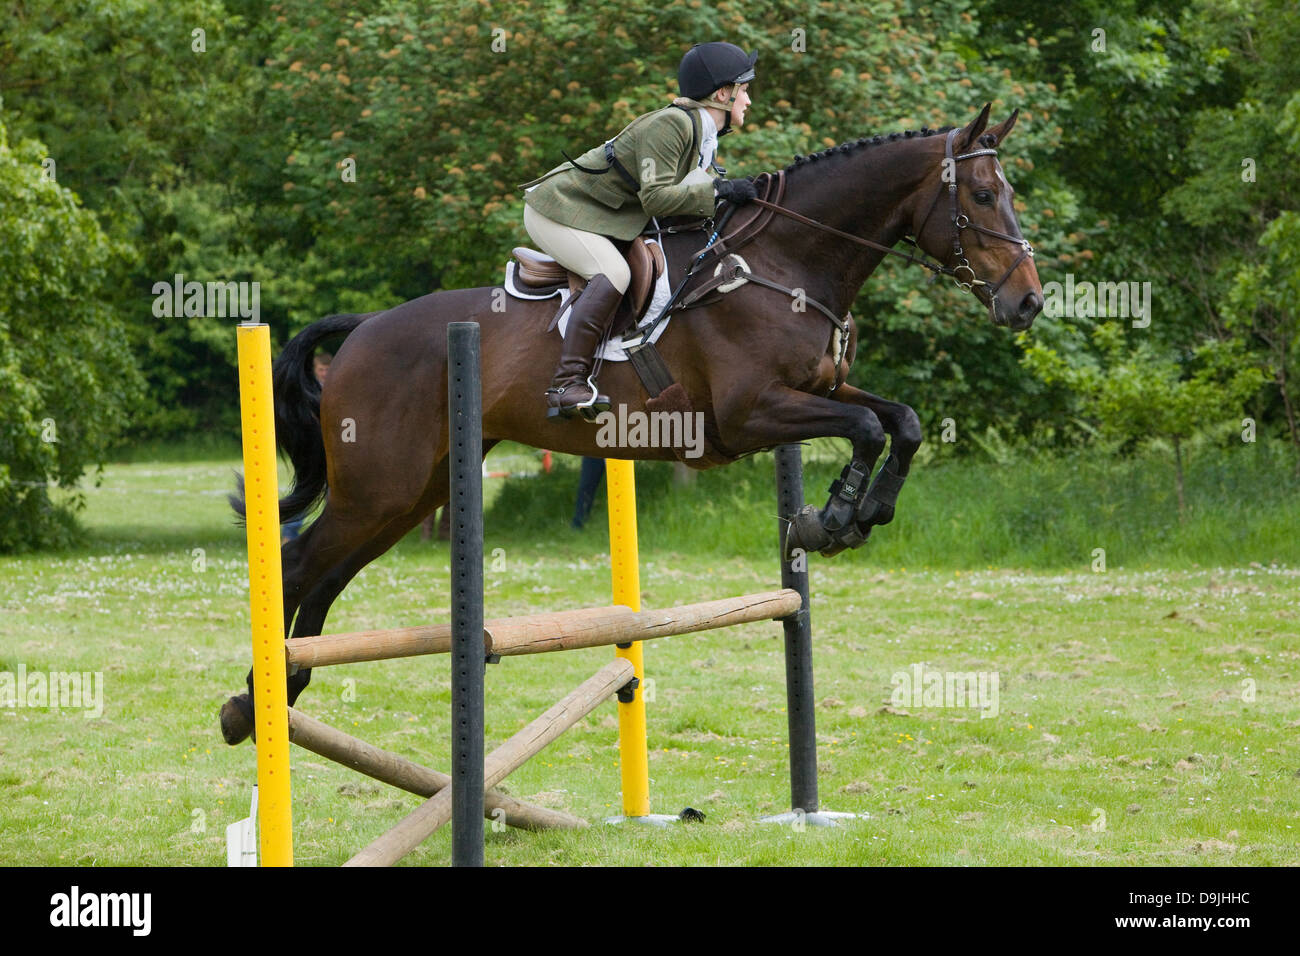 A competitor taking part in a One Day Event. The event is made up of Dressage, Show Jumping and Cross Country. Stock Photo